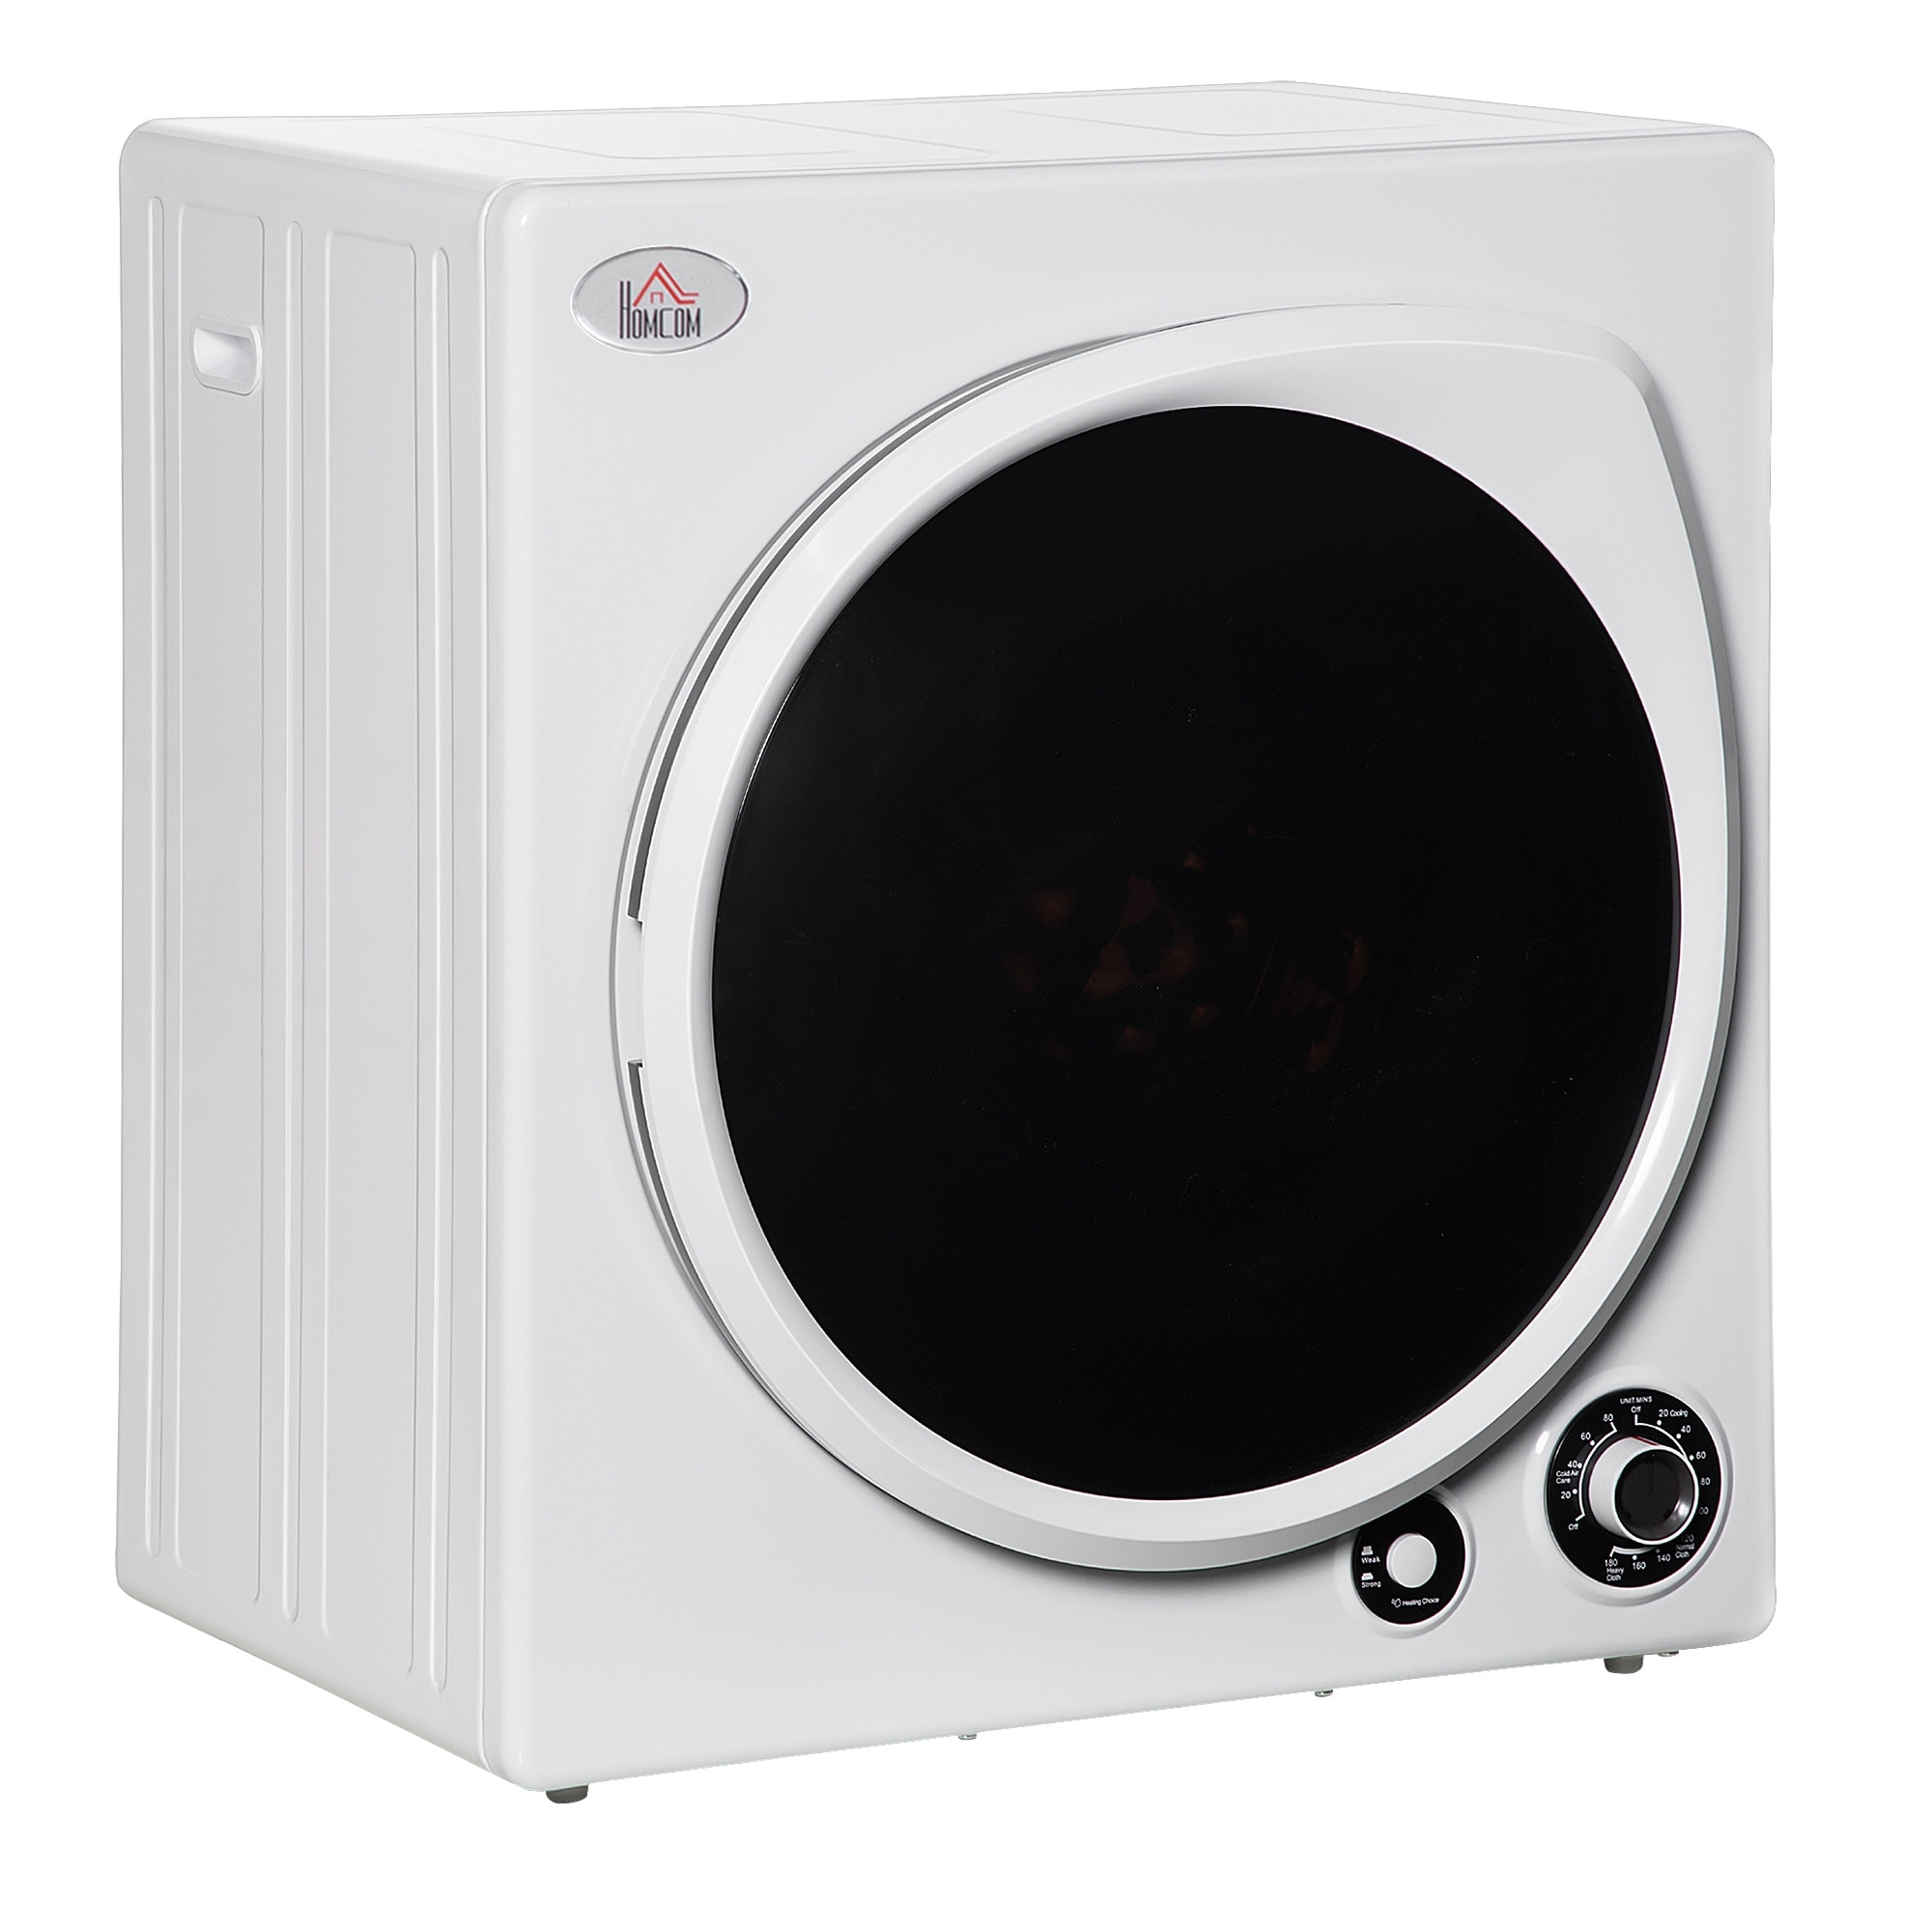 https://ak1.ostkcdn.com/images/products/is/images/direct/369e3b9bb55639aa1aae1e8104eb97362c28476c/HOMCOM-Compact-Laundry-Dryer%2C-1350W-3.22Cu.Ft-Portable-Clothes-Dryer-with-5-Drying-Modes%2CStainless-Steel-Tub-for-Apartment%2C-Home.jpg